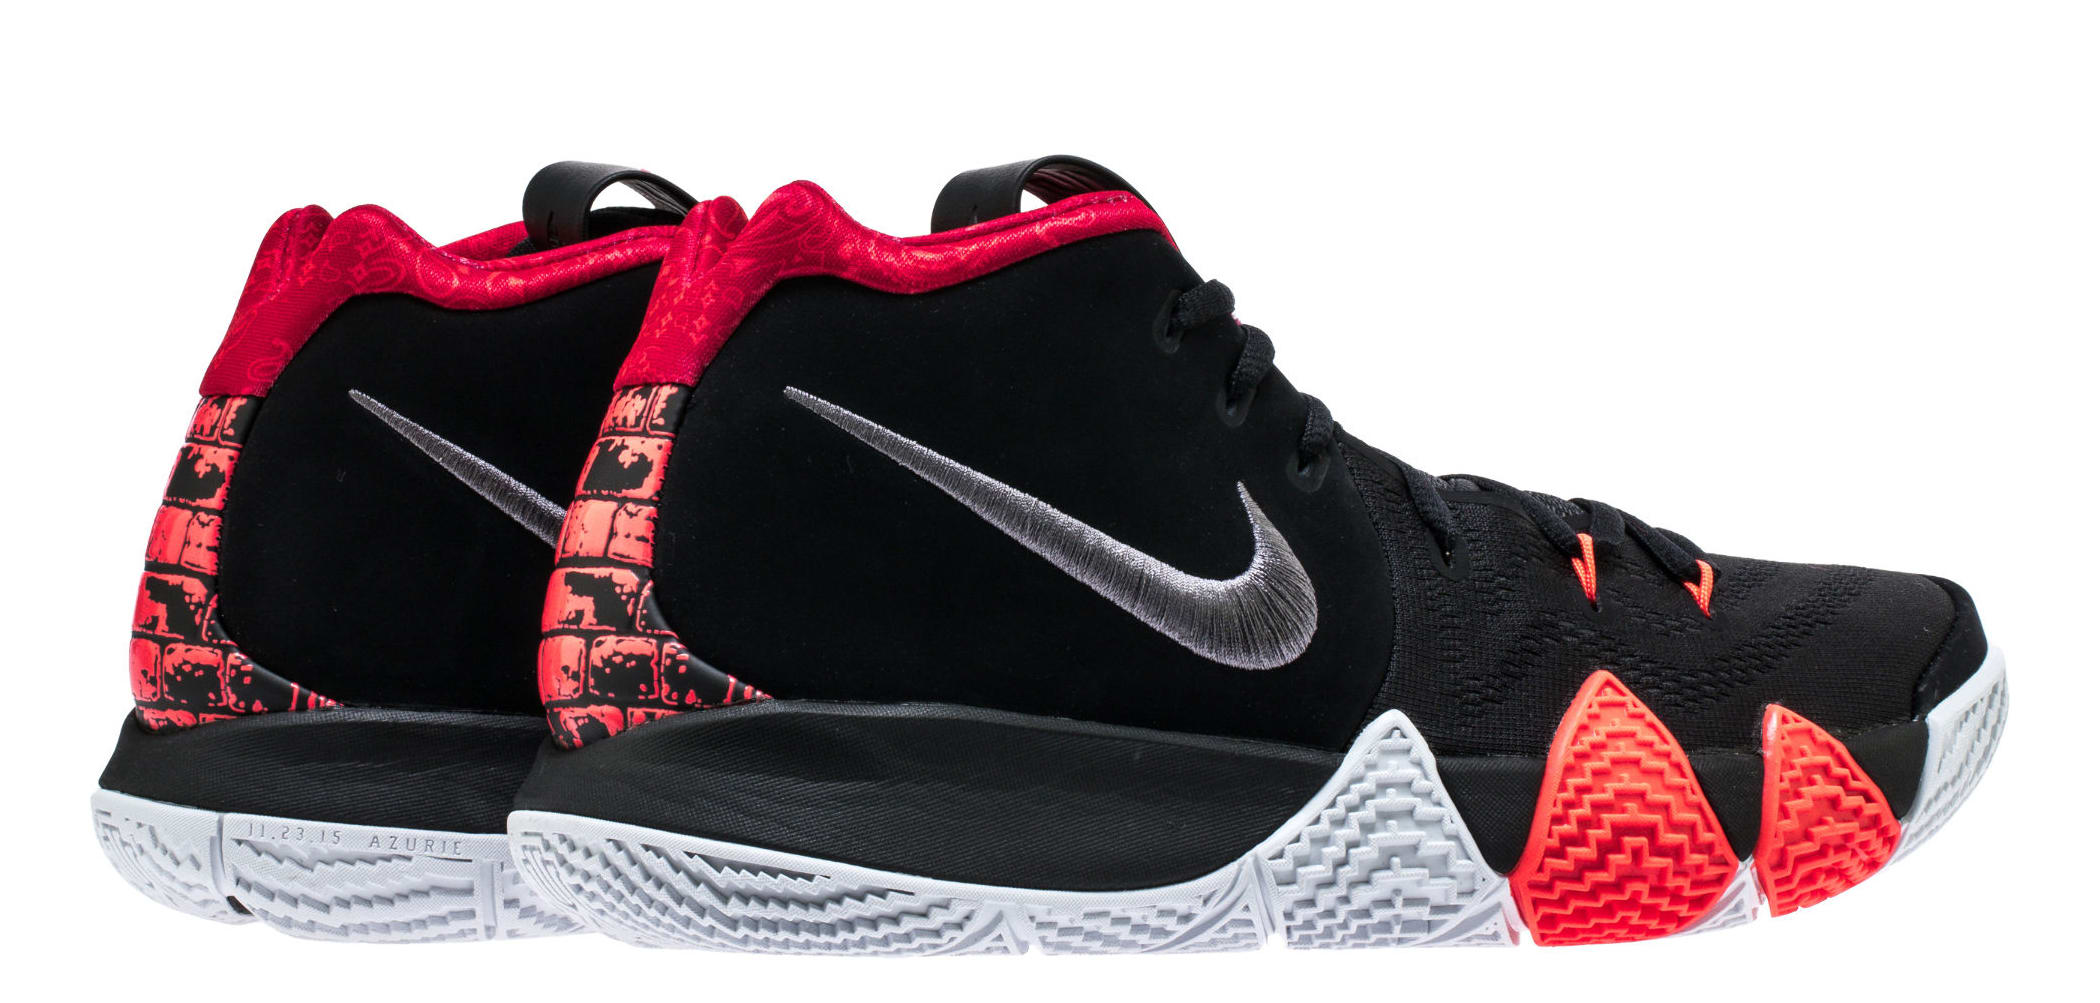 kyrie 4 red and black